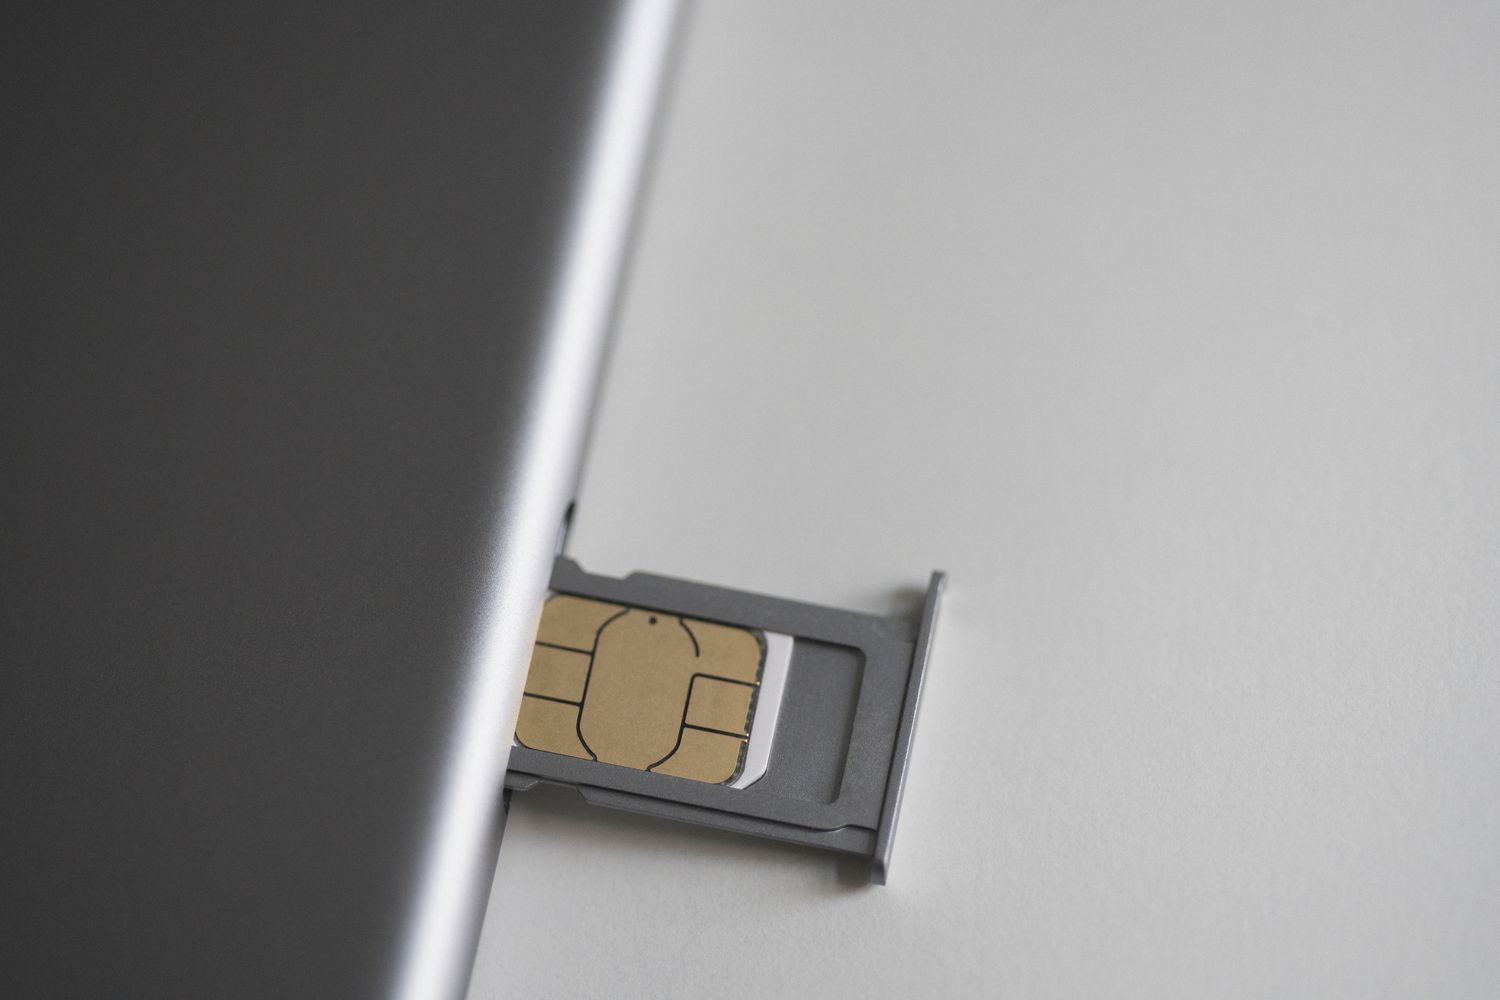 location-of-sim-card-on-ipad-quick-guide